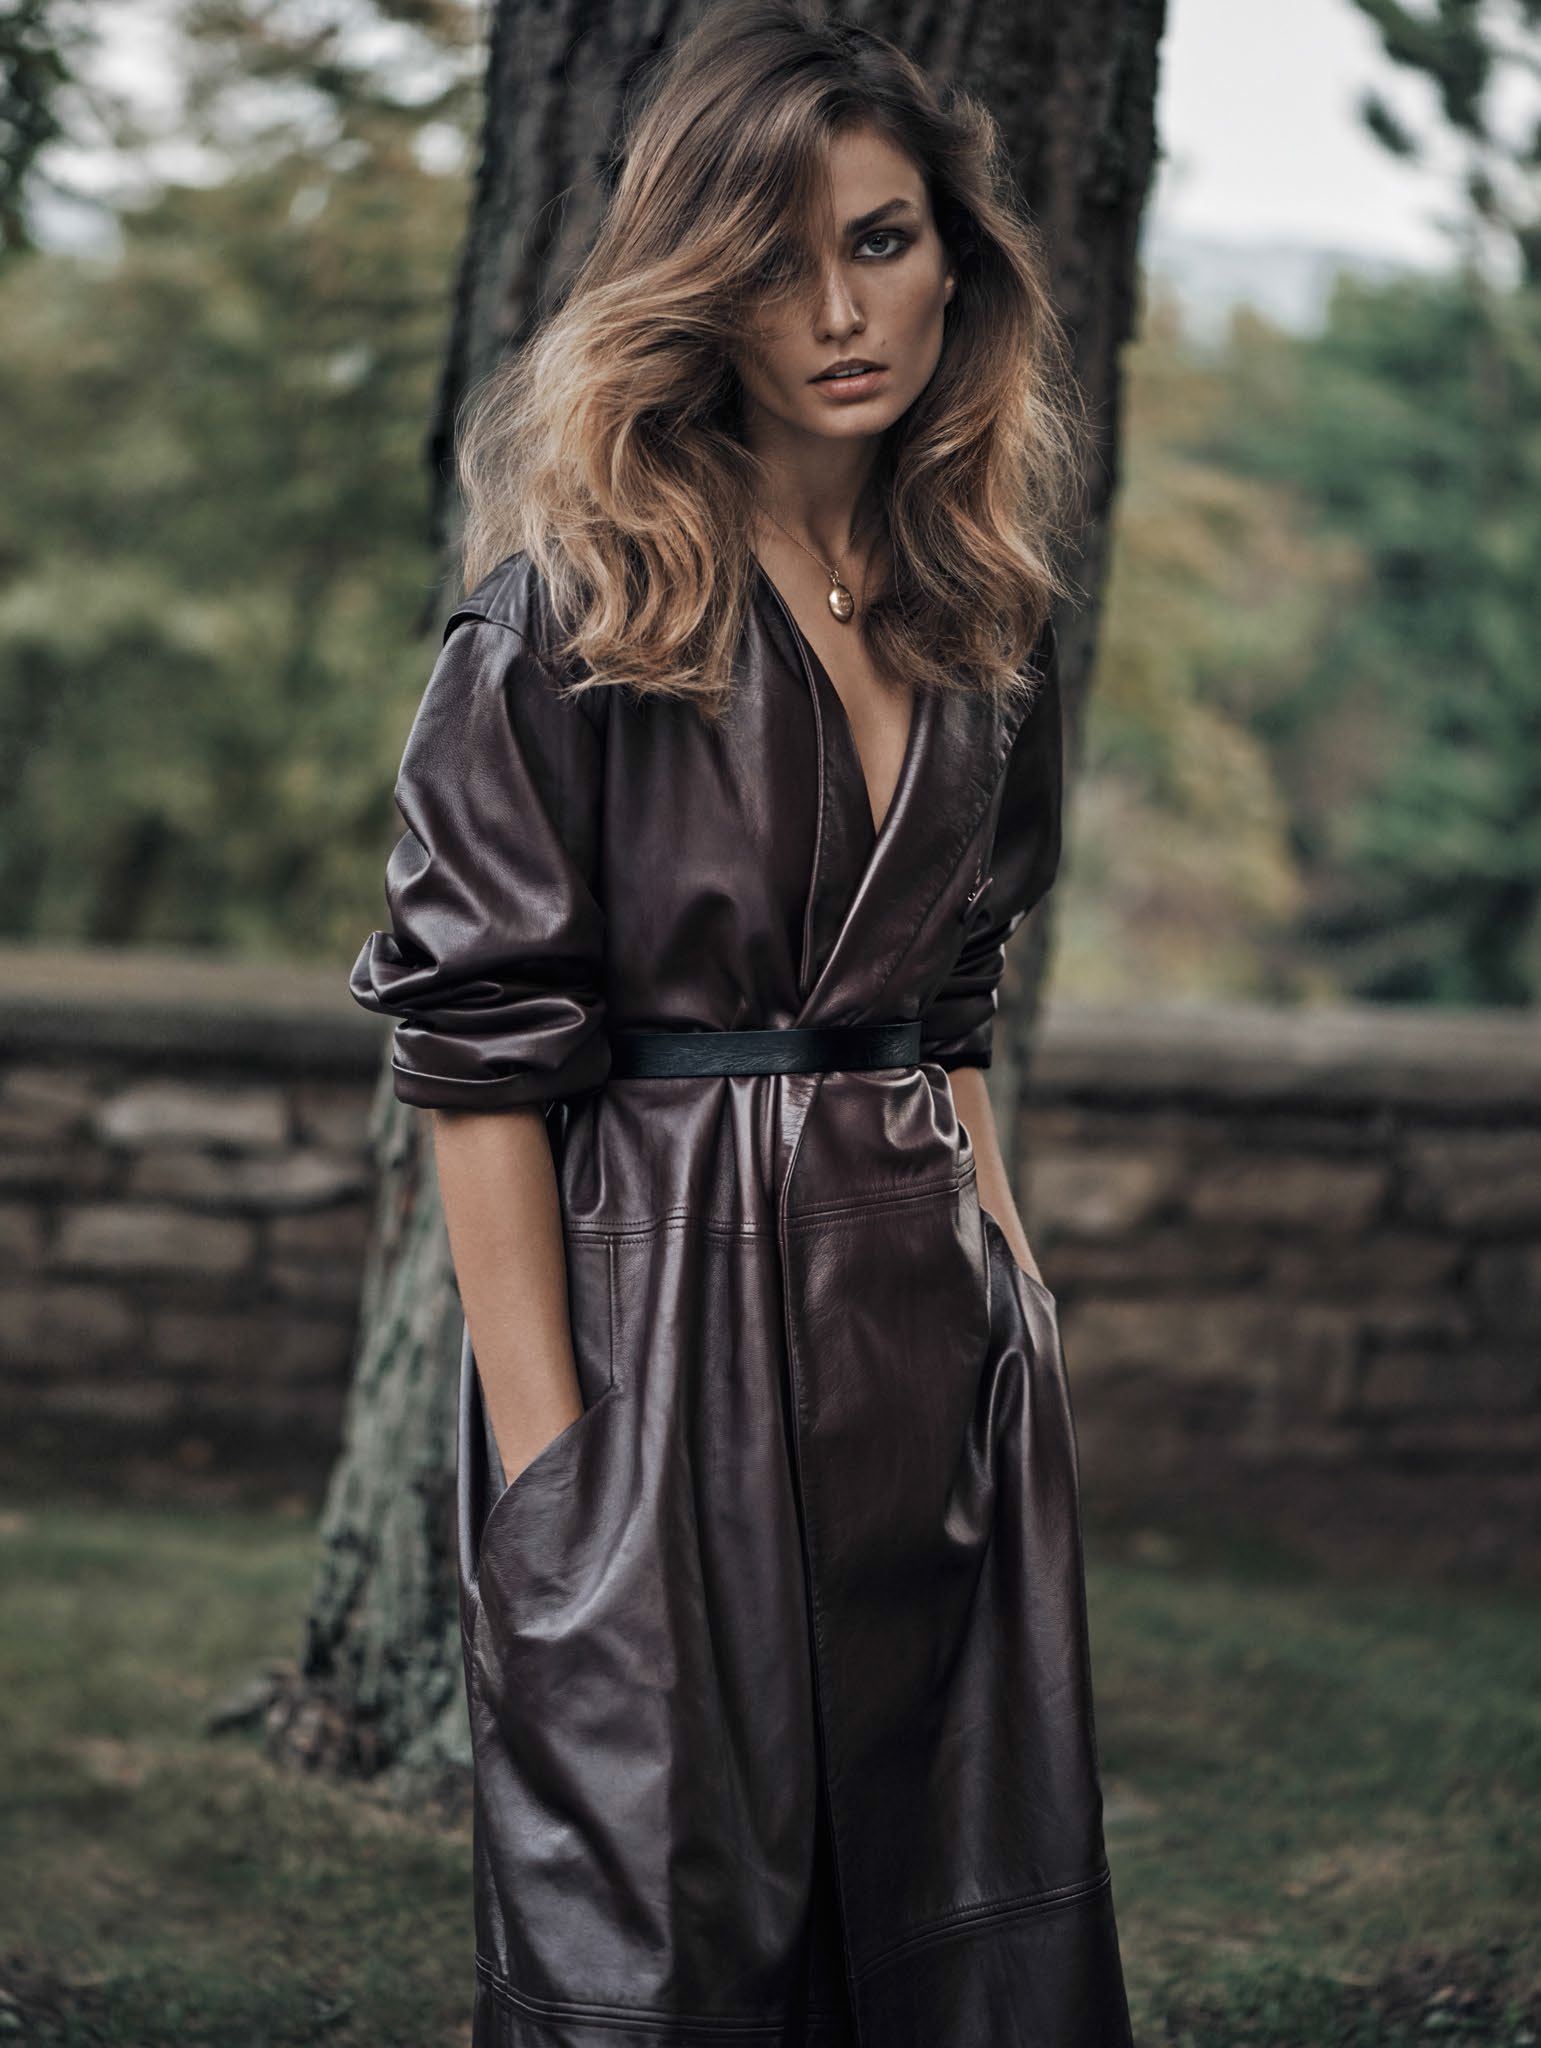 andreea-diaconu-by-lachlan-bailey-for-vogue-china-november-2015-8-folkr